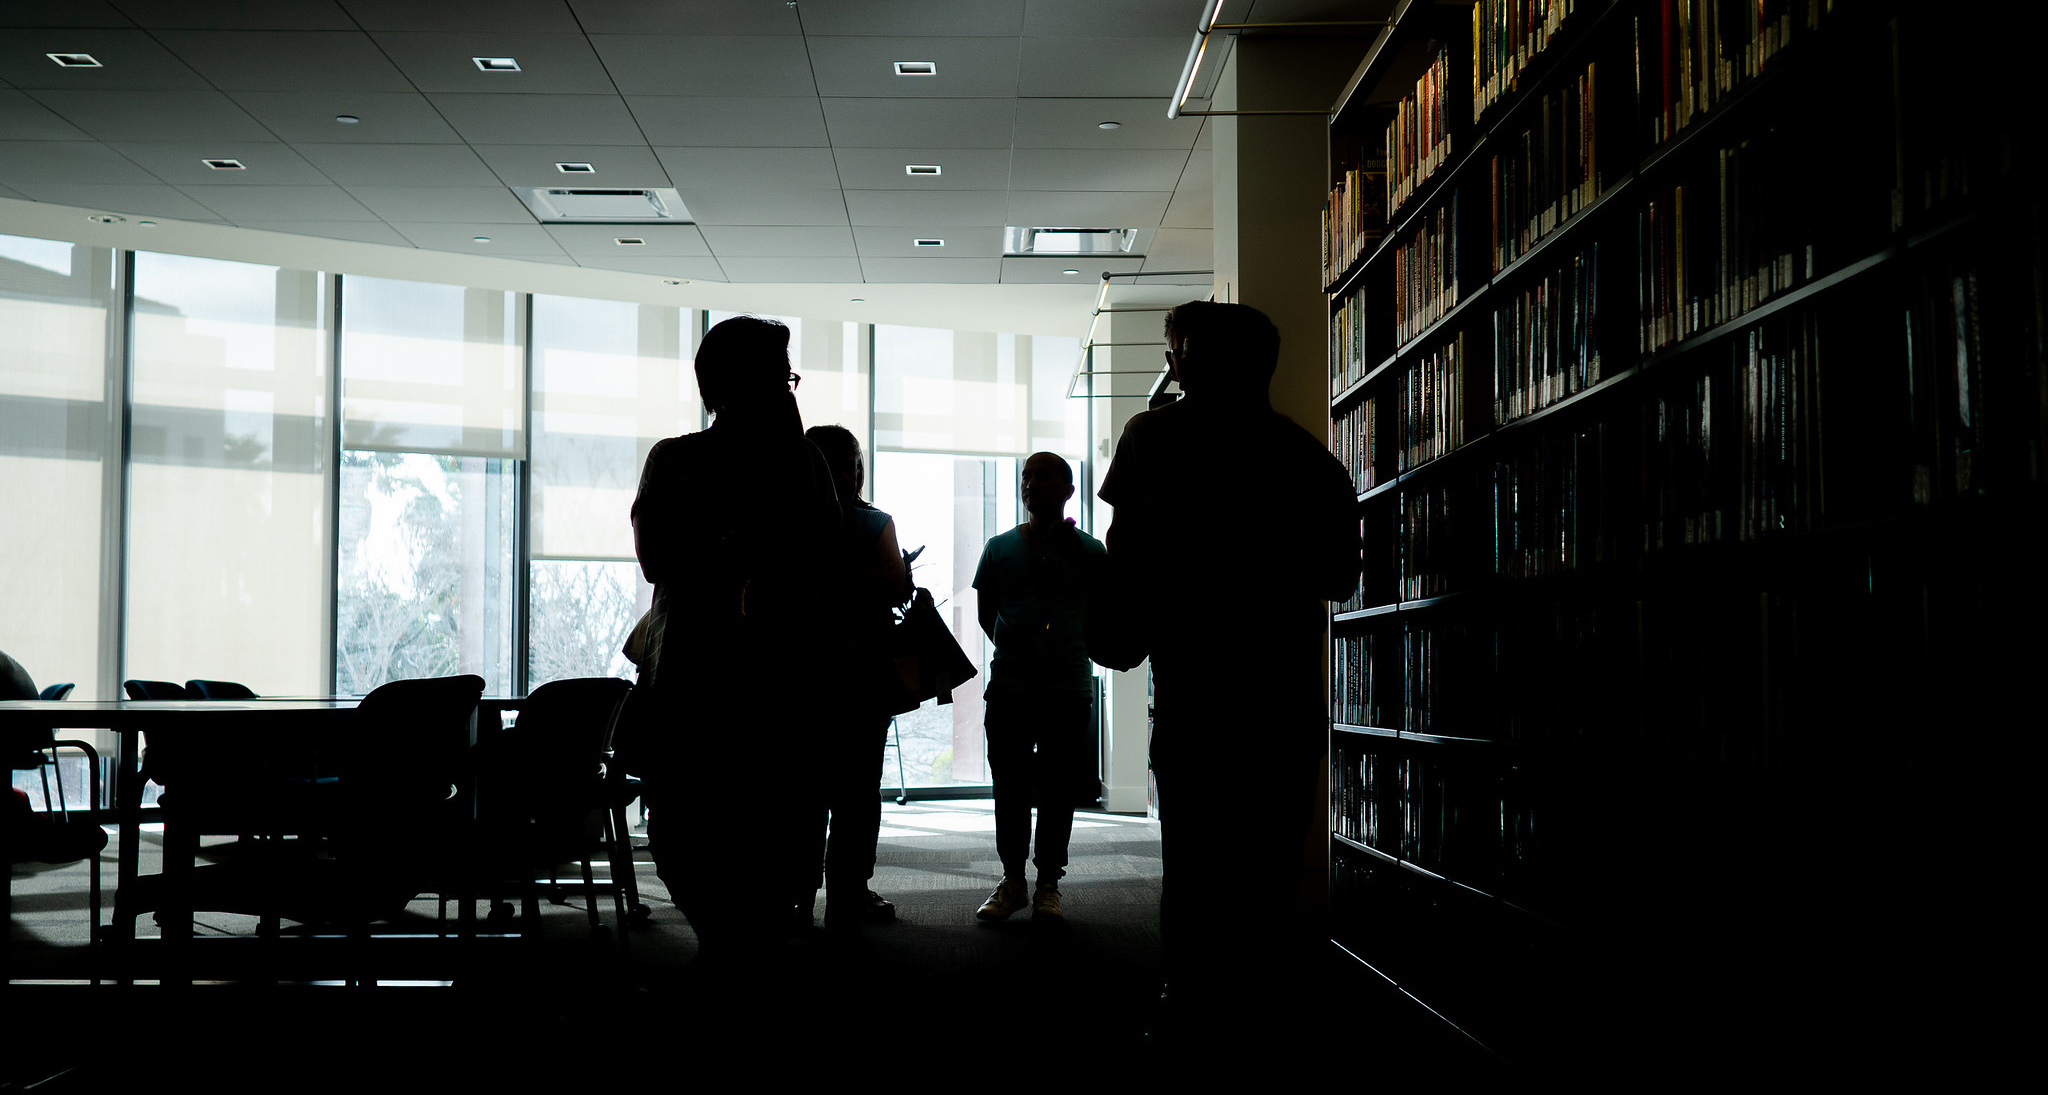 silhouette of a group in the library